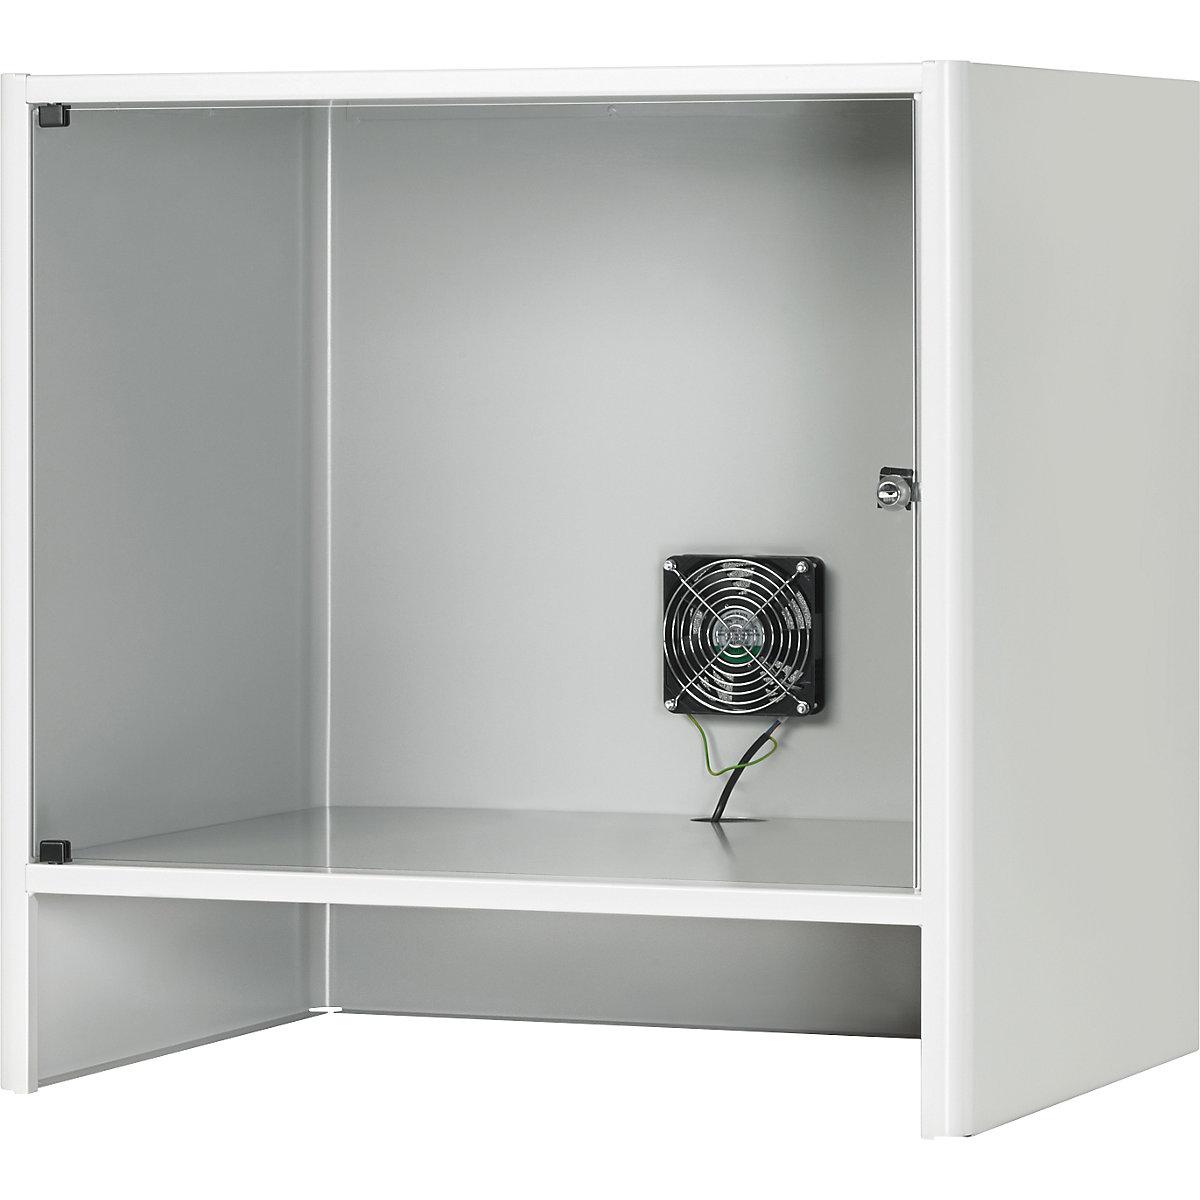 Monitor housing with integrated ventilation fan - RAU